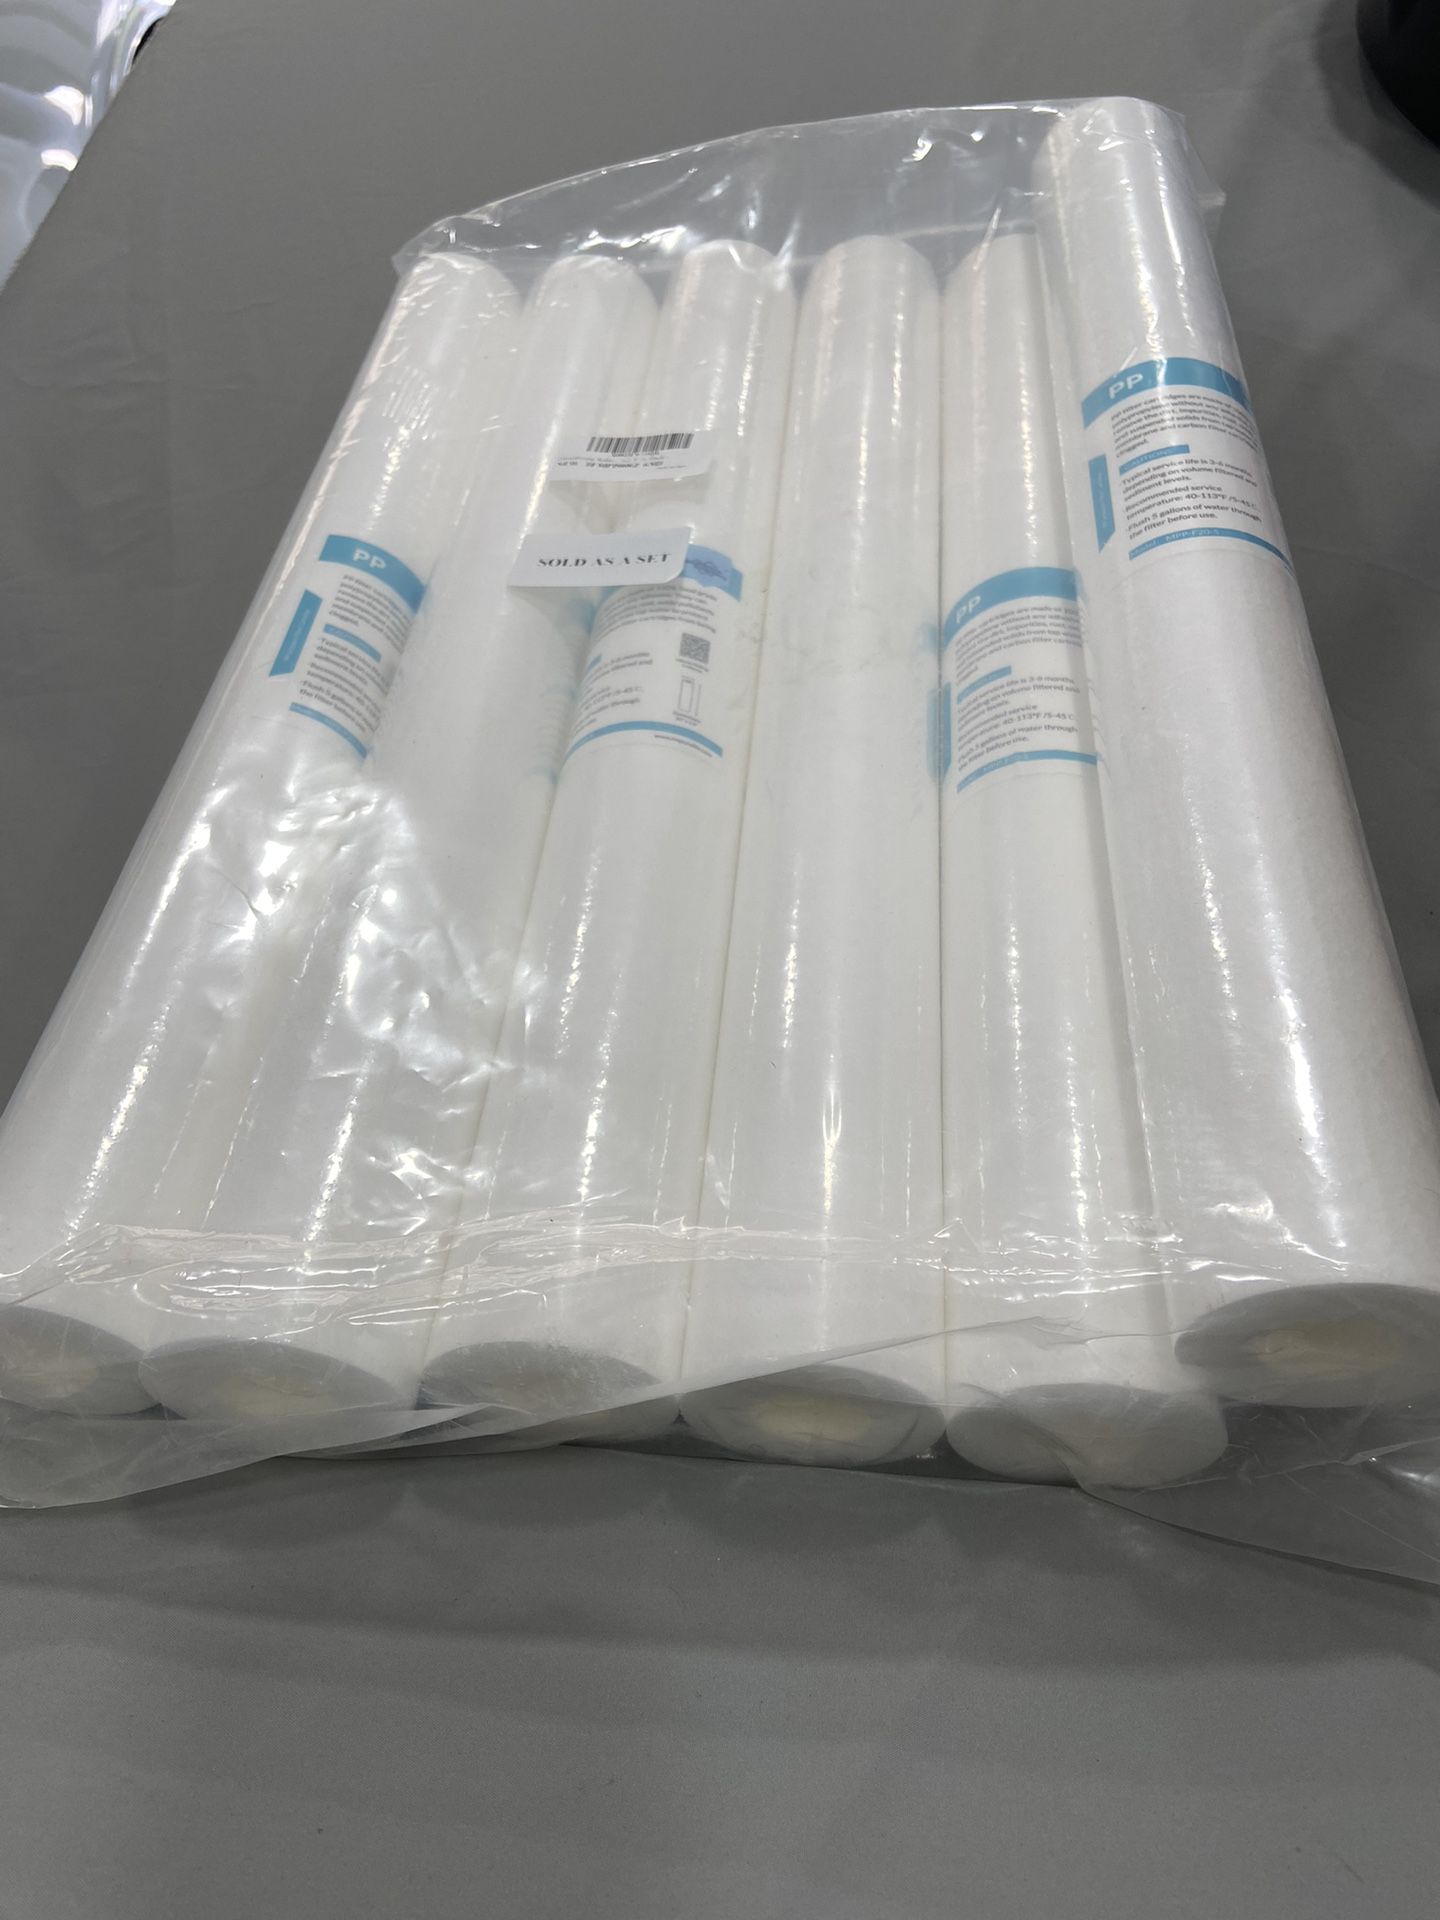 5 Micron Water Filters